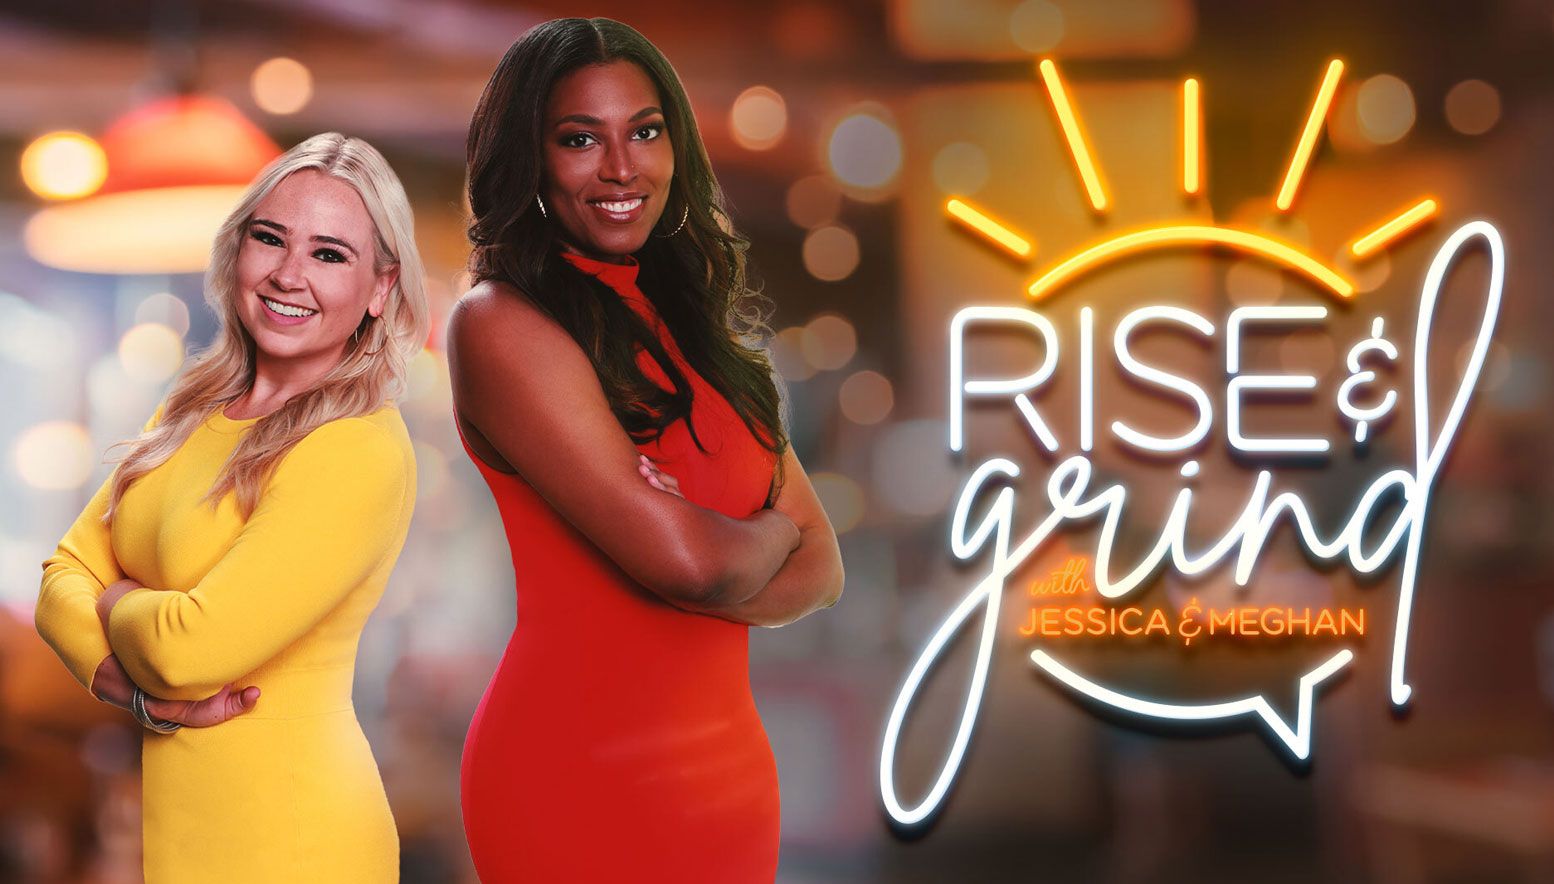 Grind City Media to launch new morning program “Rise & Grind with Jessica Benson and Meghan Triplett”